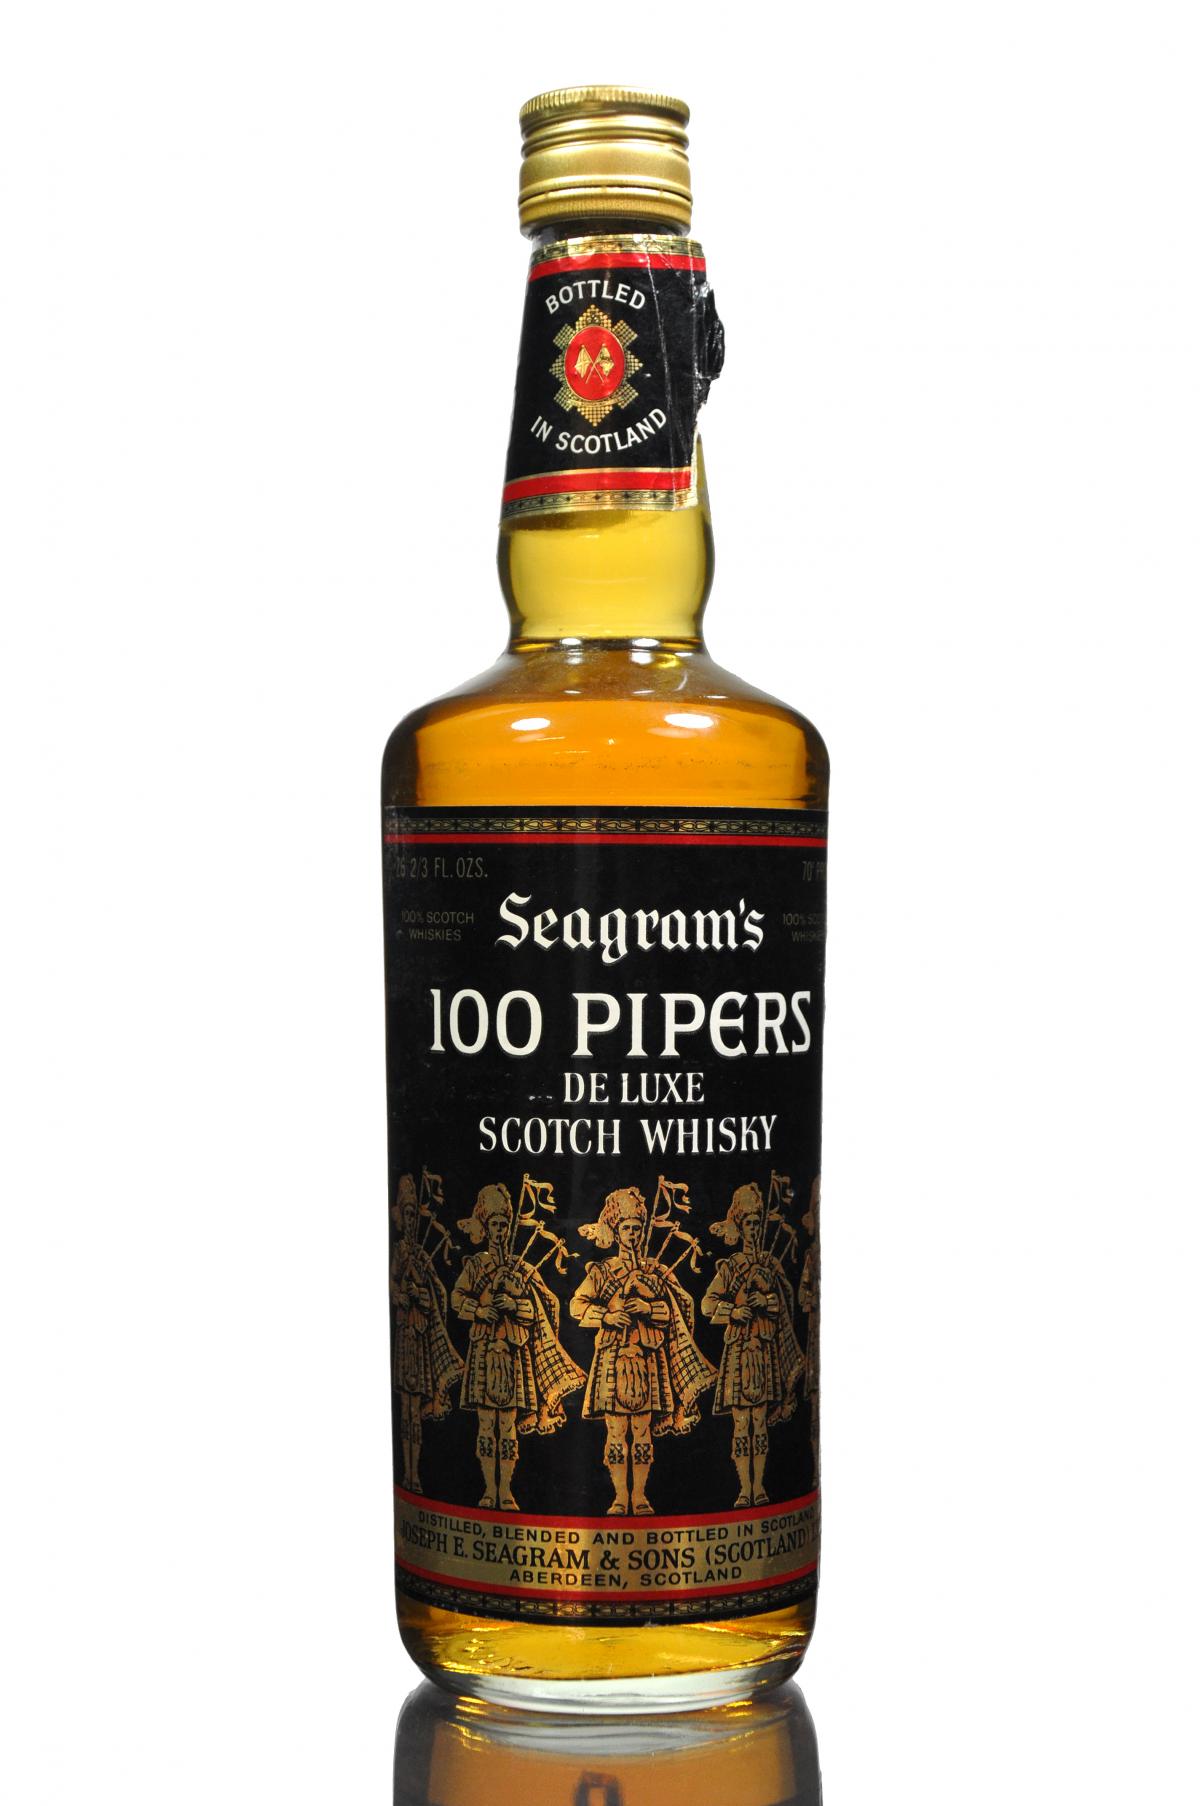 Seagrams 100 Pipers - 1970s